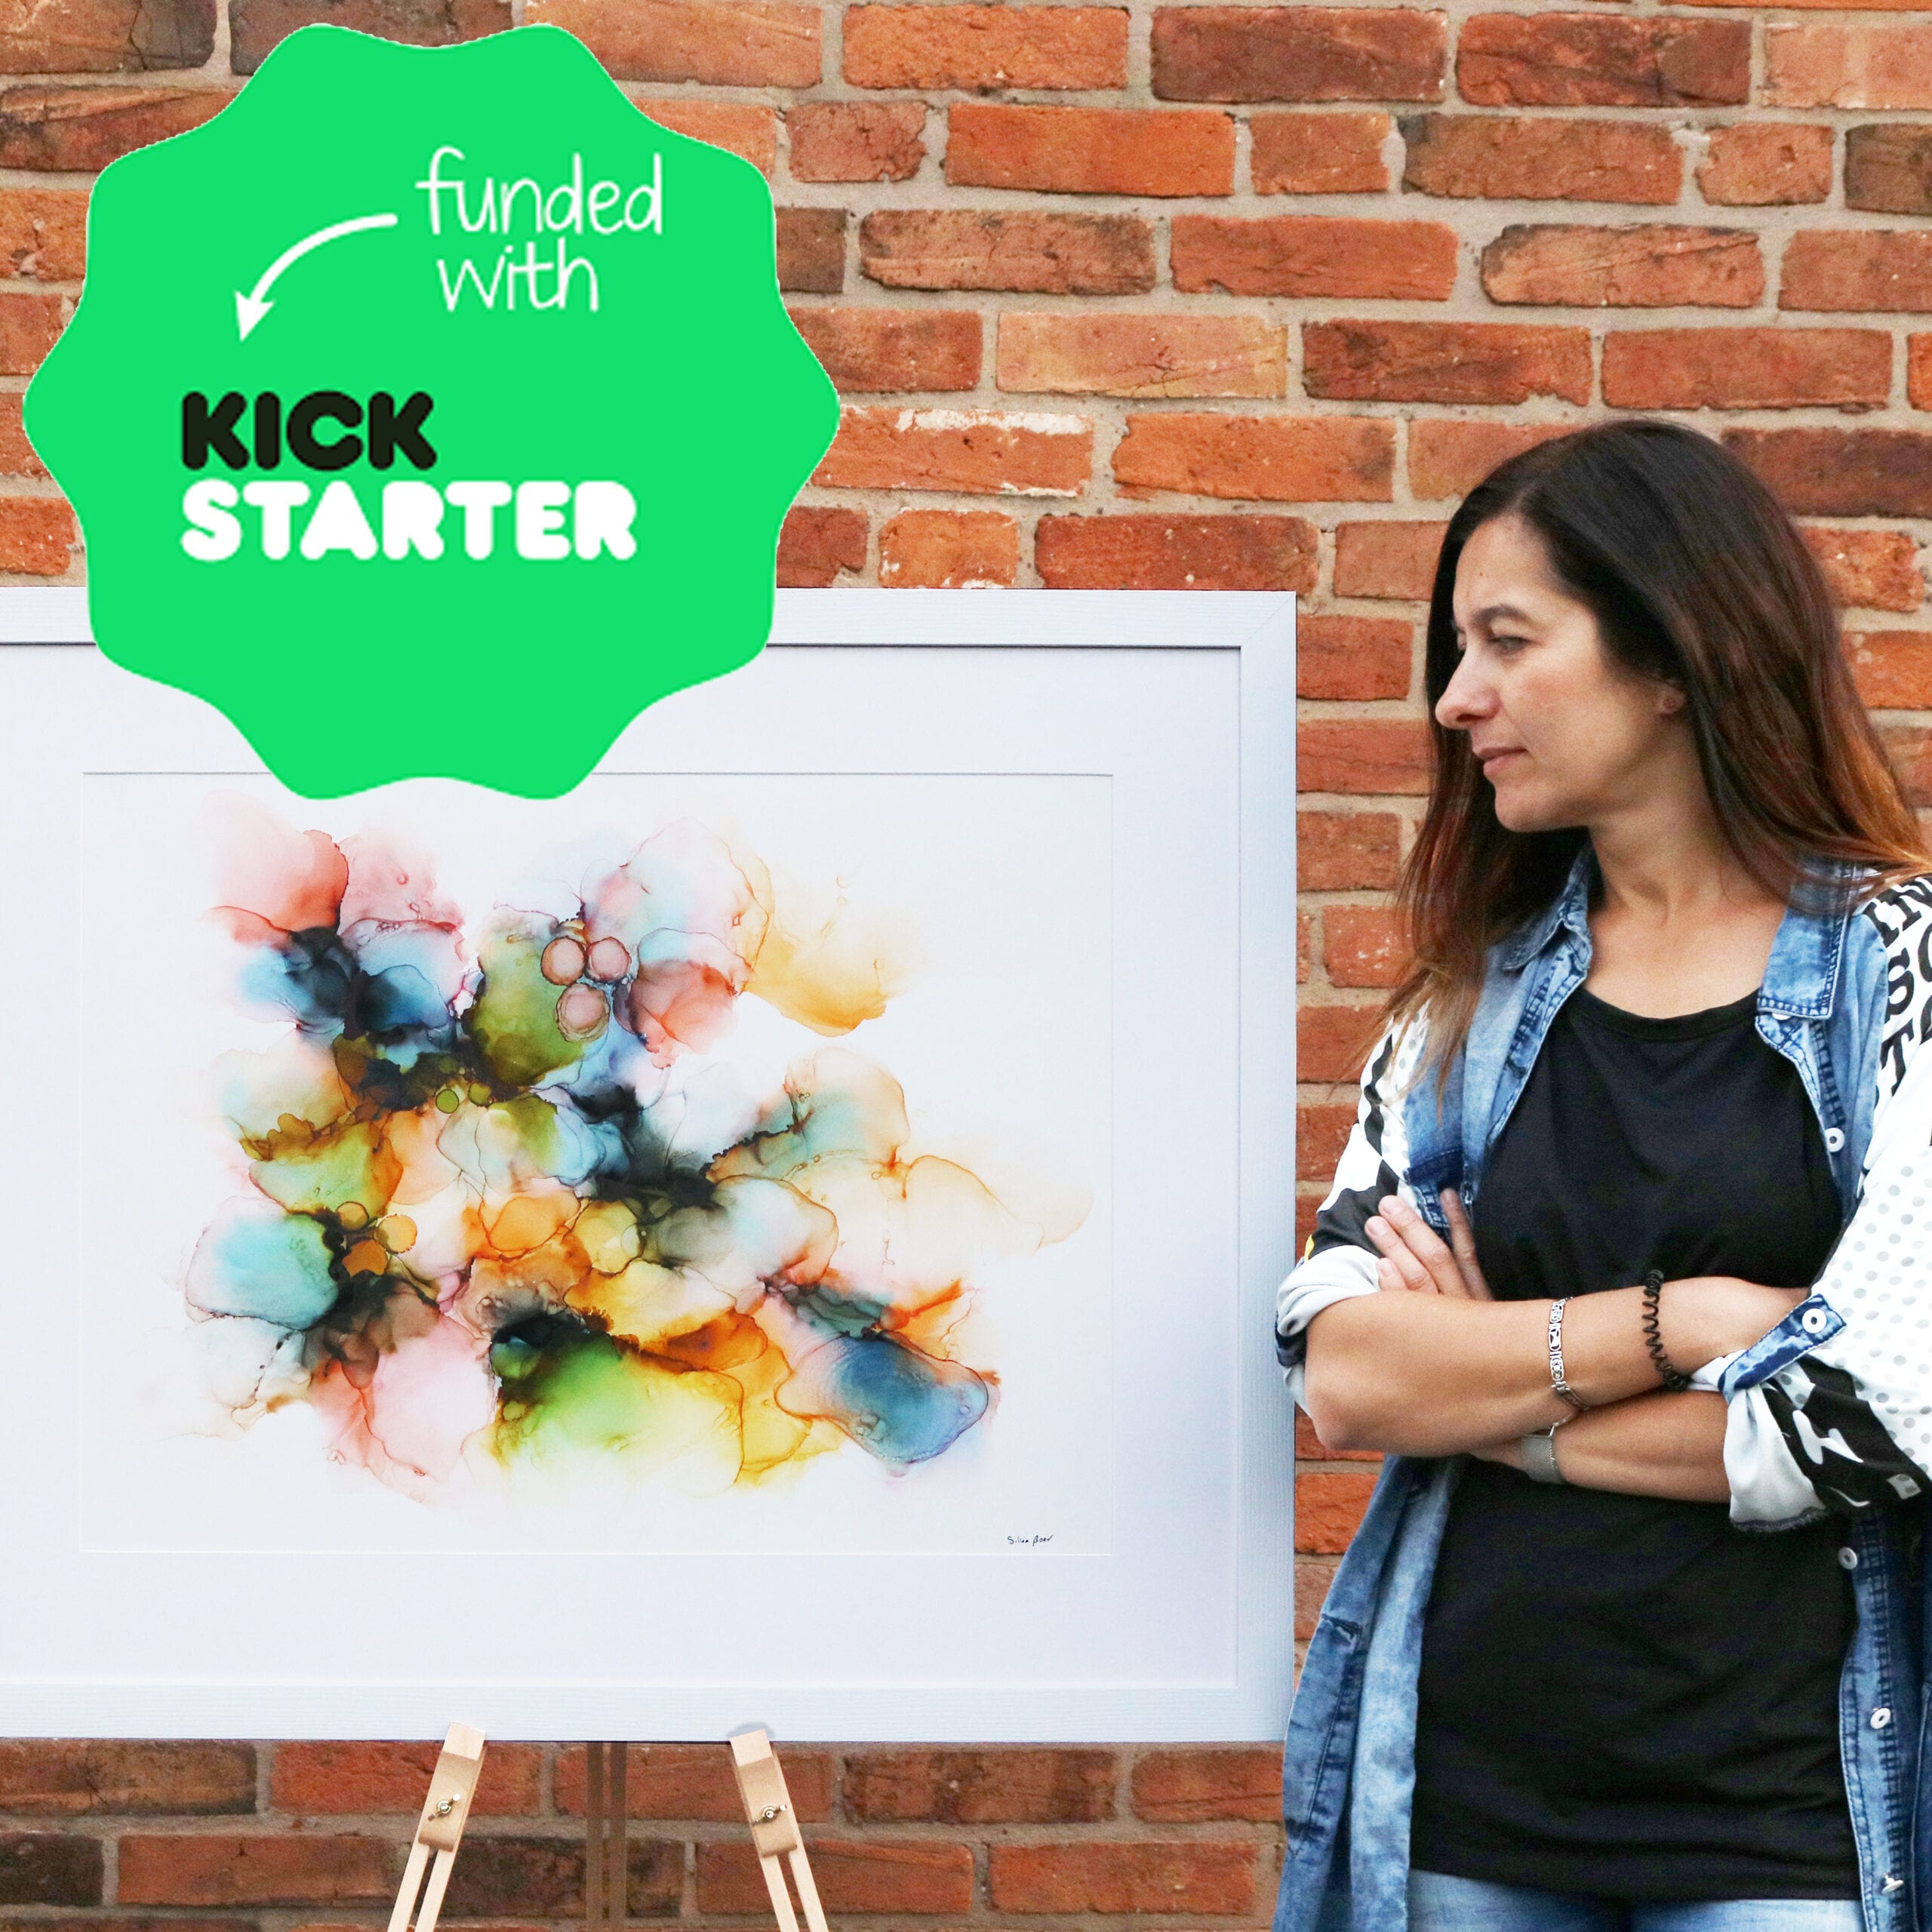 Funded with kickstarter